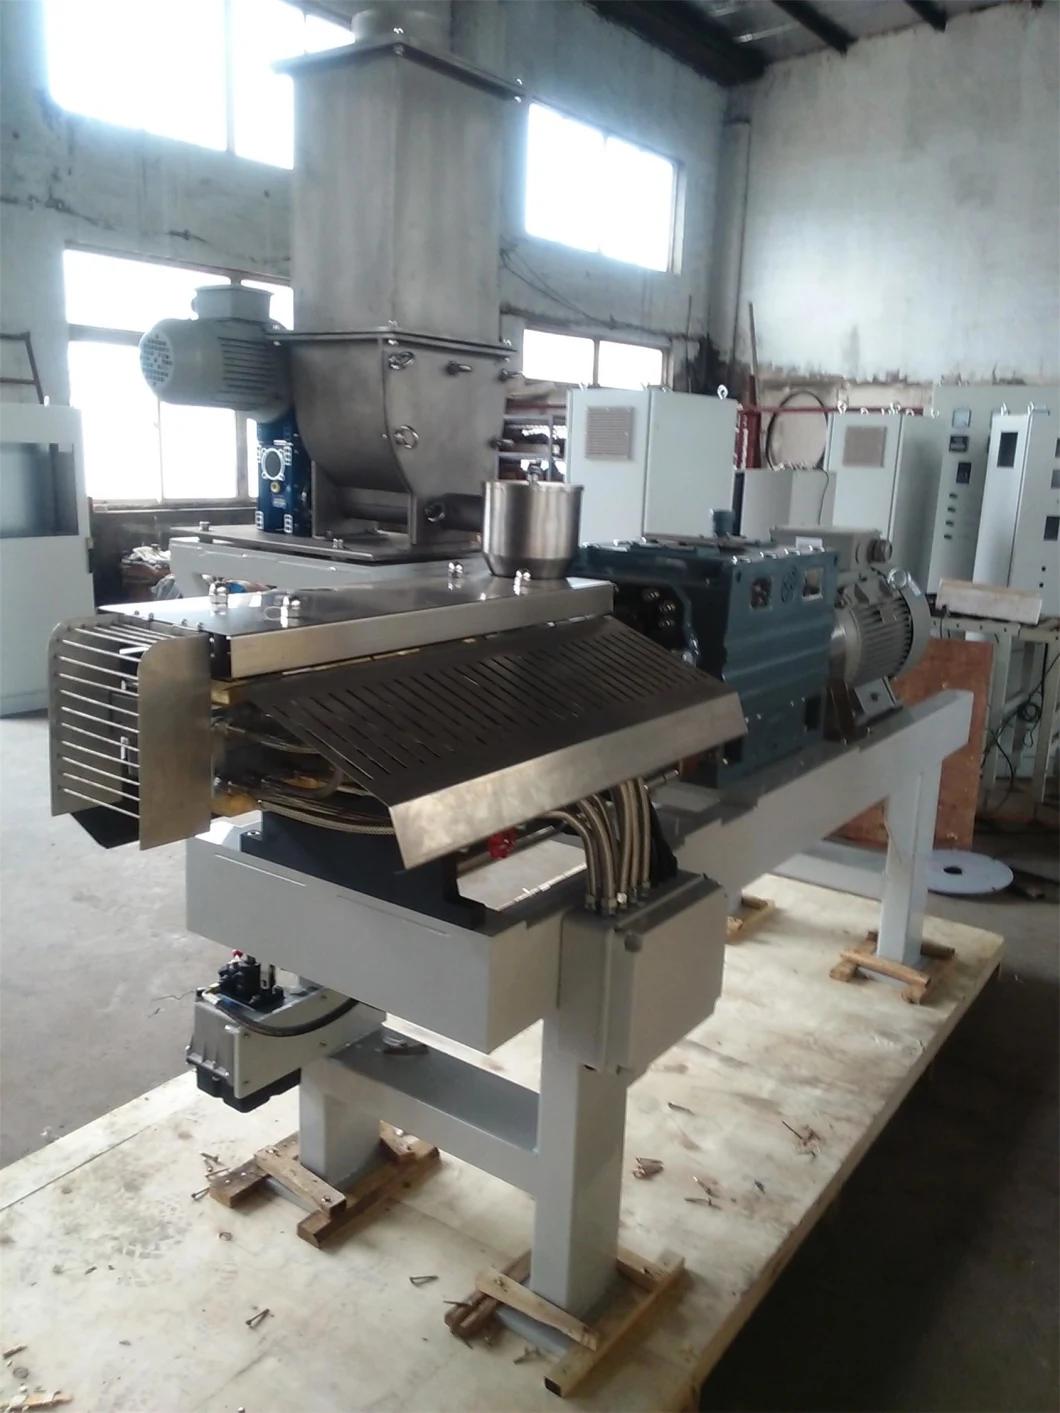 Production Scale Powder Coating Twin Screw Extruder